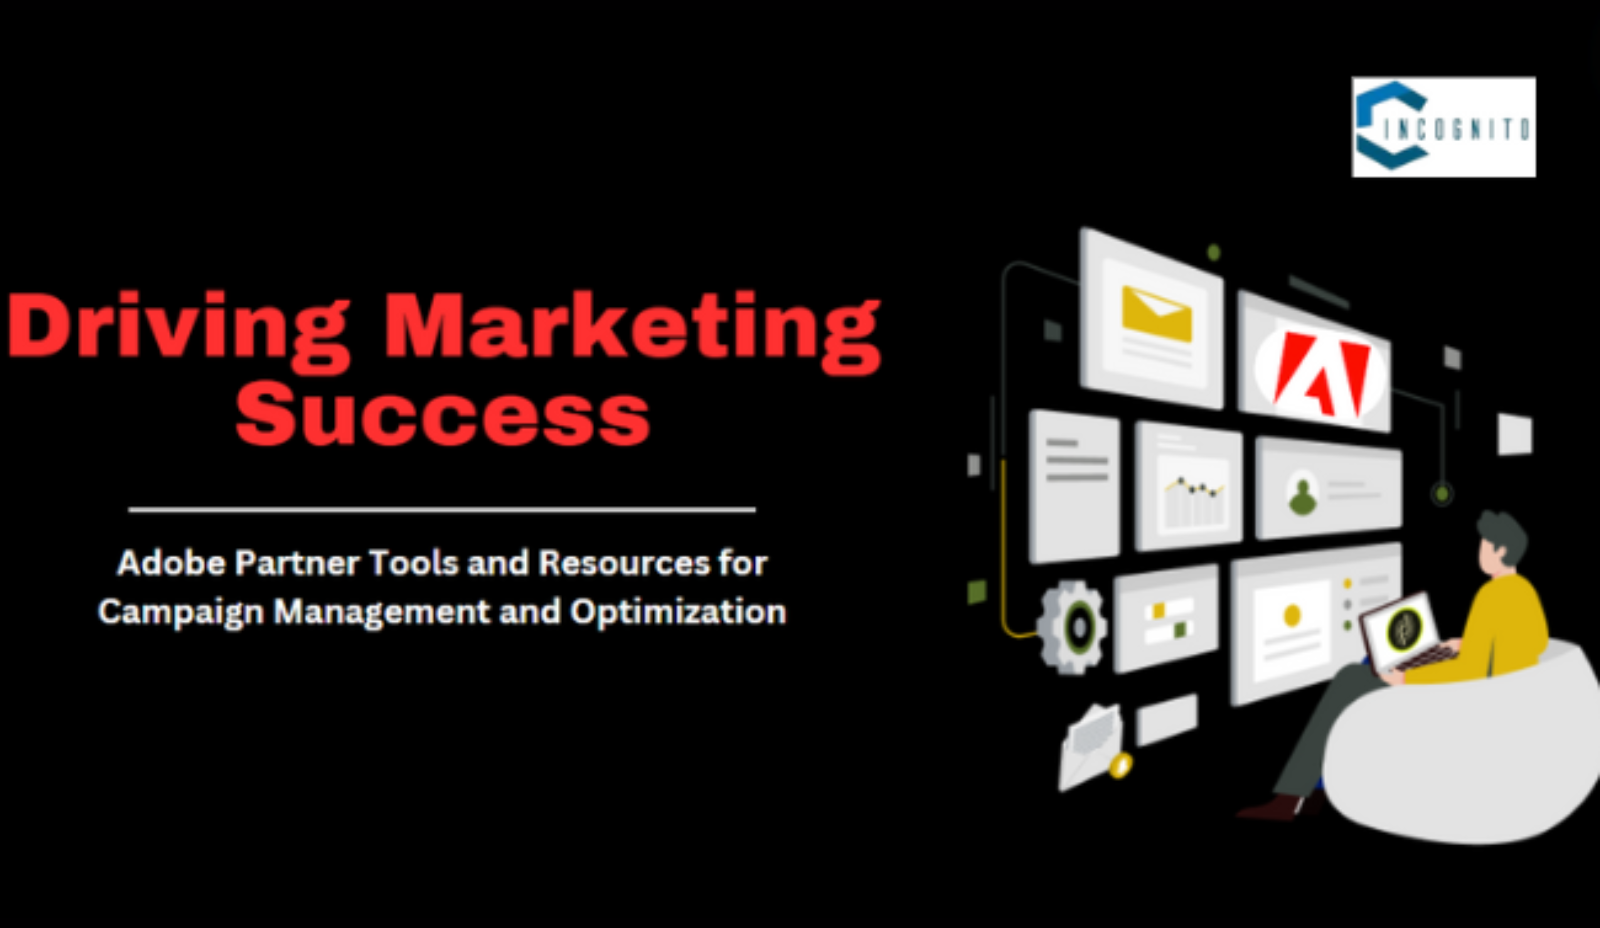 Driving Marketing Success: Adobe Partner Tools and Resources for Campaign Management and Optimization